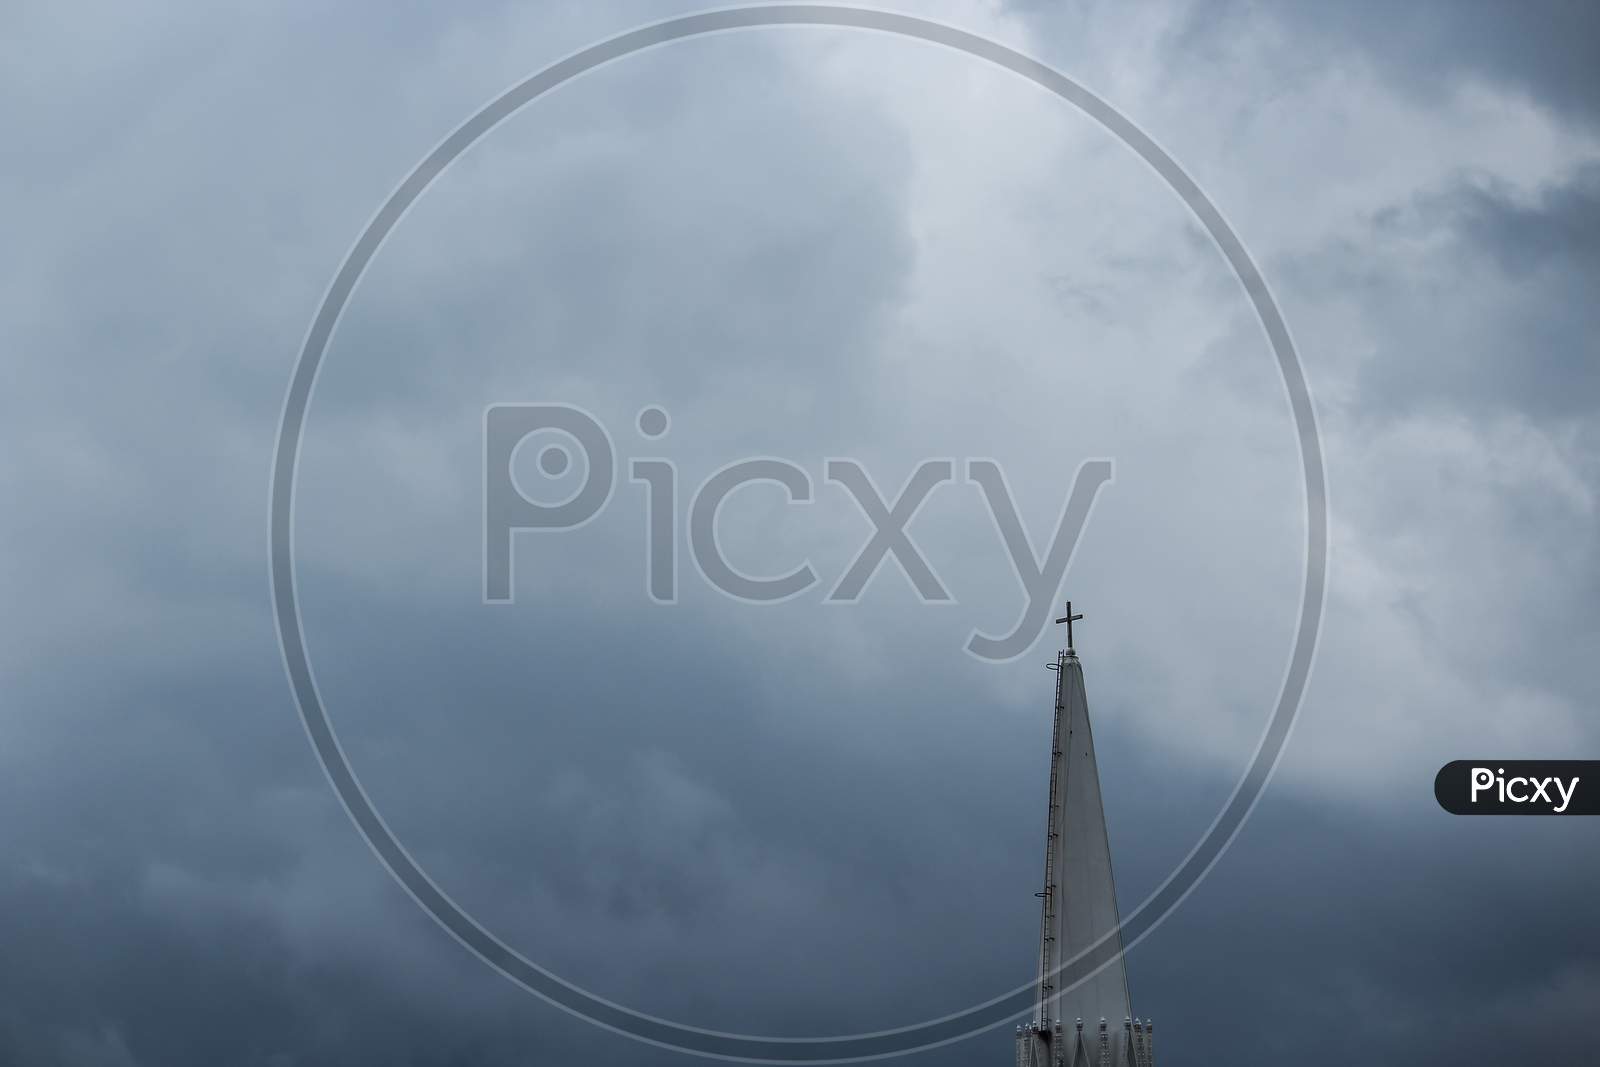 The Top Of A Church Under A Cloudy Sky